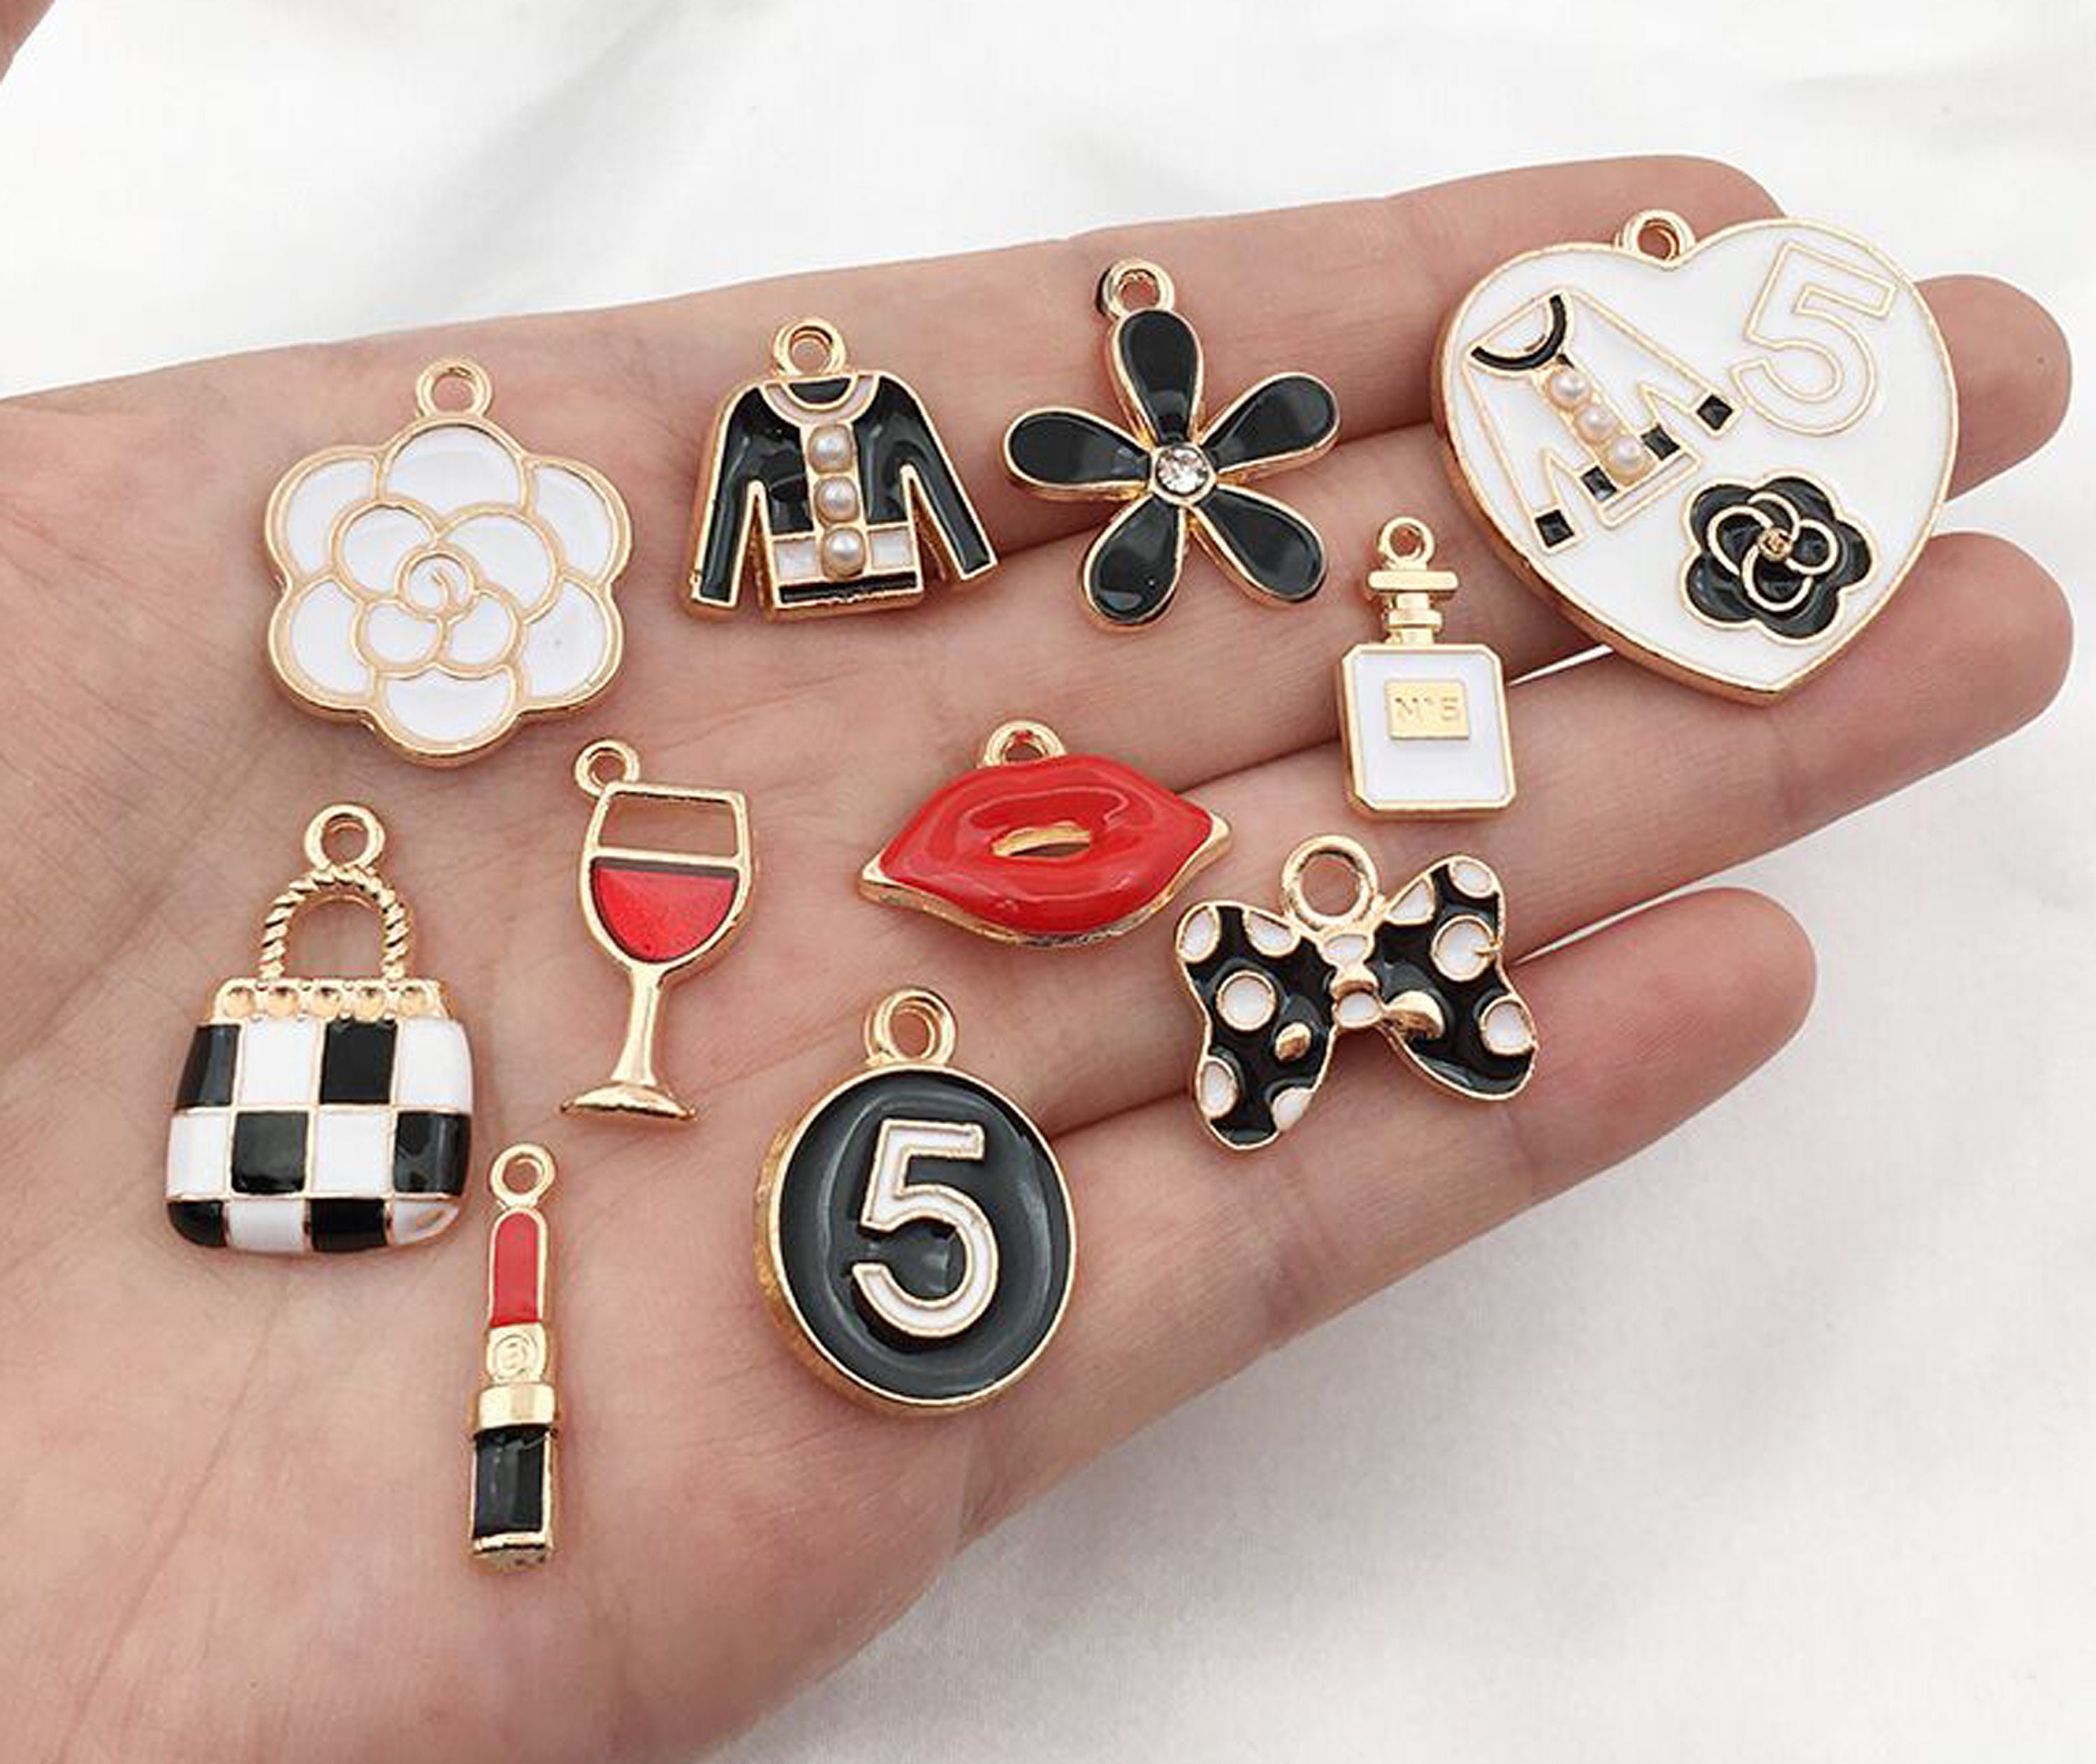 Bulk 100 Enamel Charms, Mixed Jewelry Charms, Gold Plated Metal Charm  Pendant Collection, Assorted DIY Bracelet Charms 